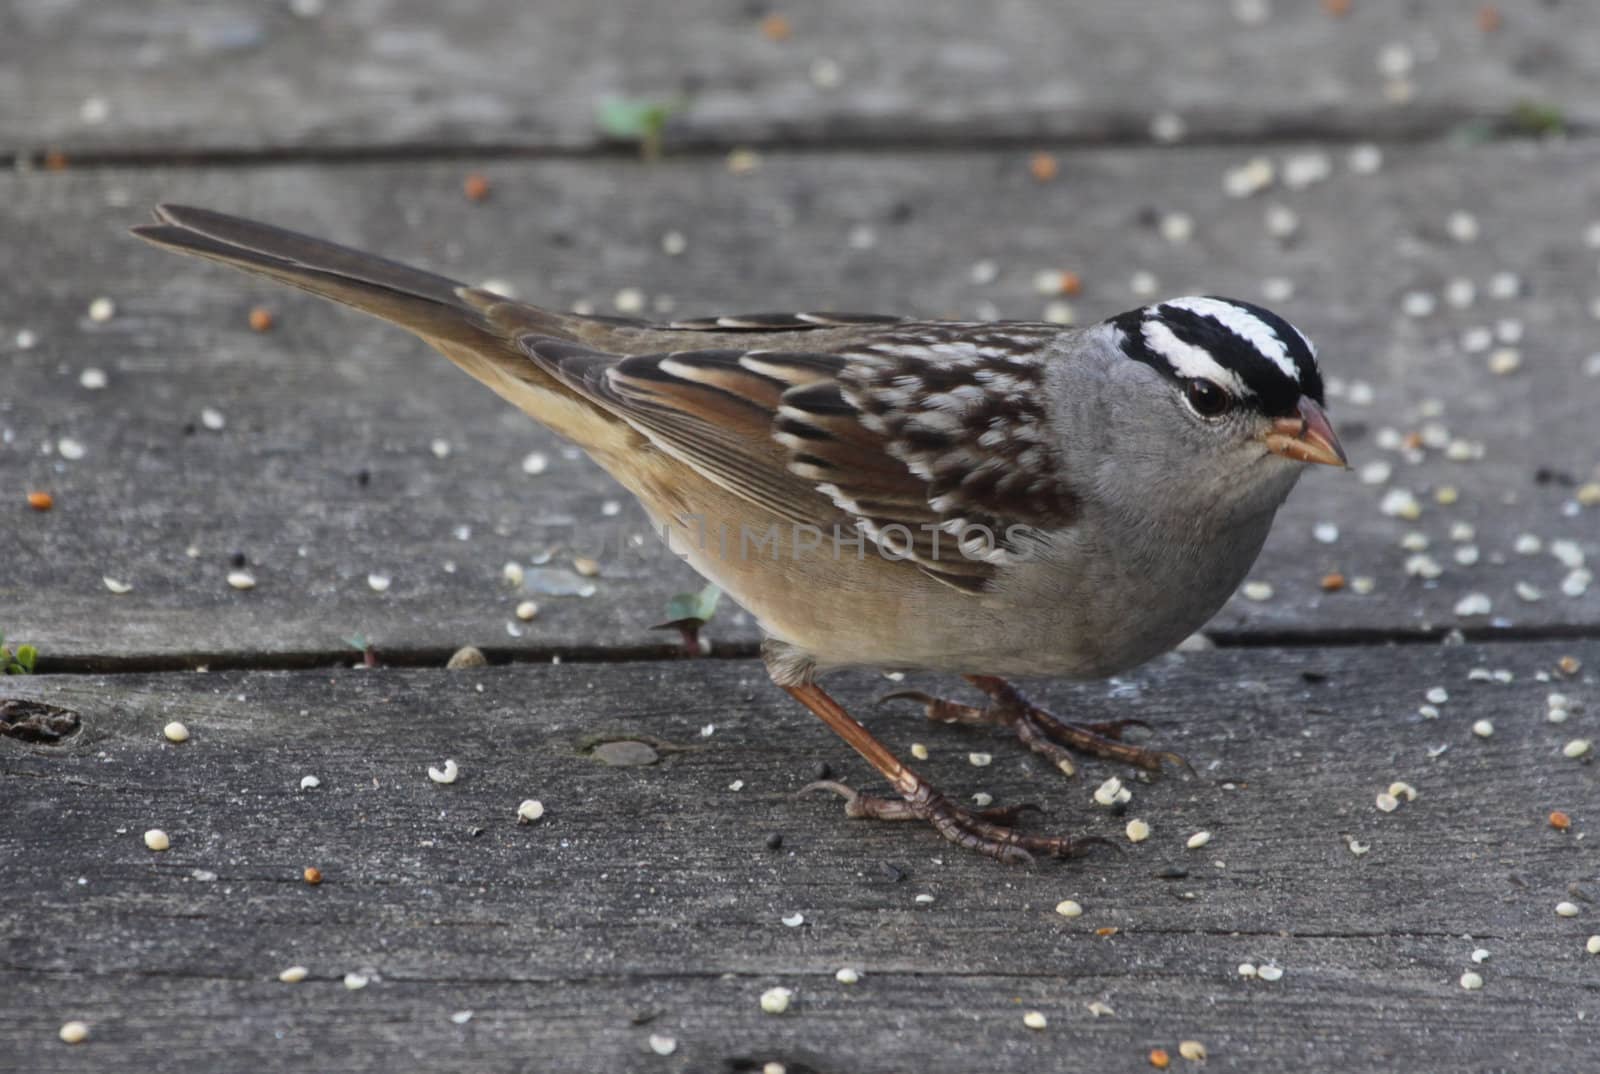 A foraging White-crowned Sparrow (Zonotrichia leucophrys) eating seeds on a deck.